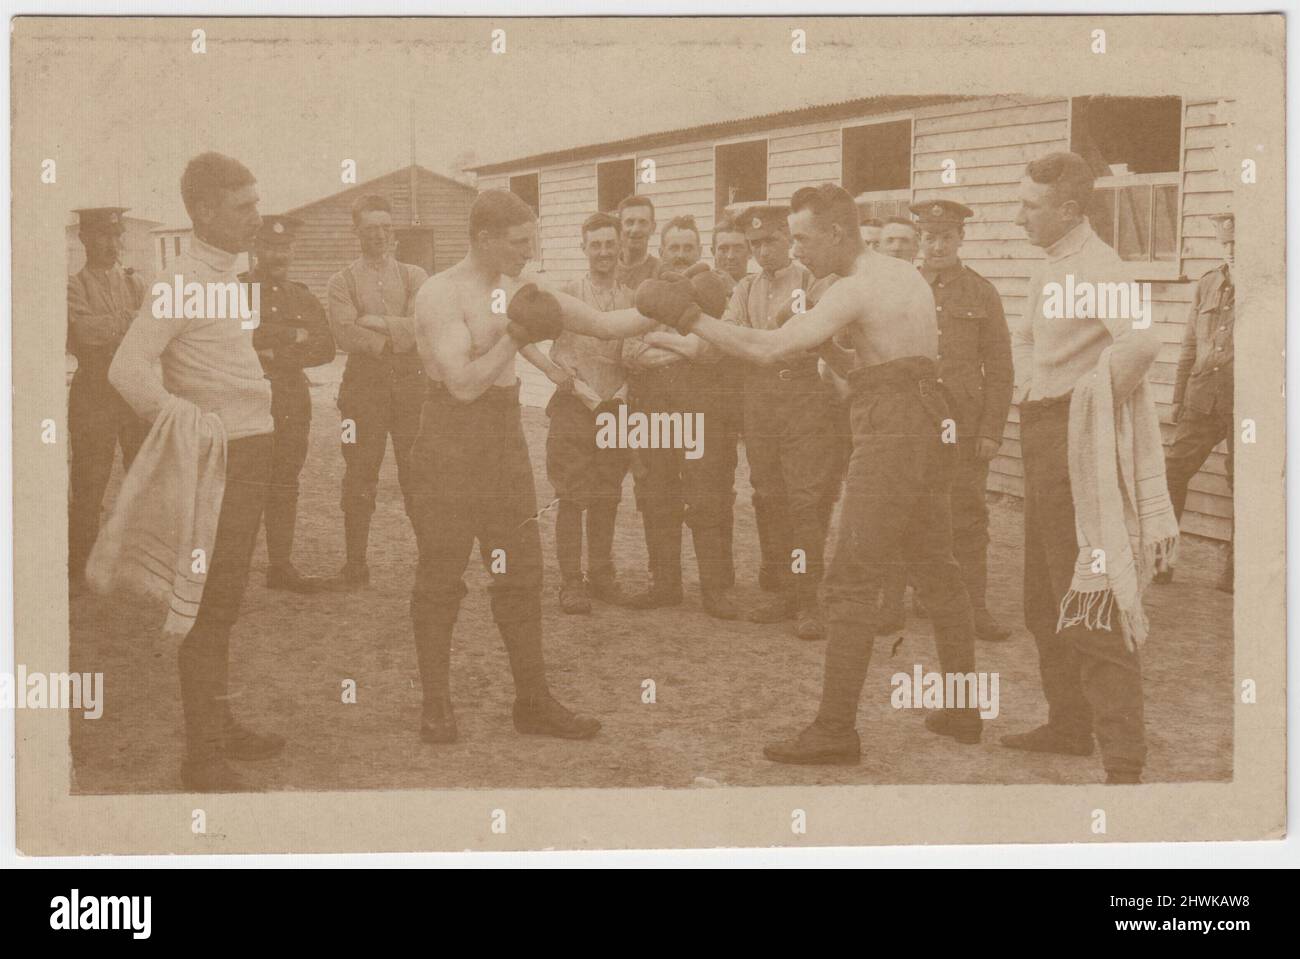 Army boxing match in a camp of the Royal Engineers, early 20th century. Two soldiers, stripped to the waist & wearing boxing gloves, are sparring. They are watched by their seconds, carrying towels, and a small group of soldiers. Barracks huts can be seen in the background of the photograph Stock Photo